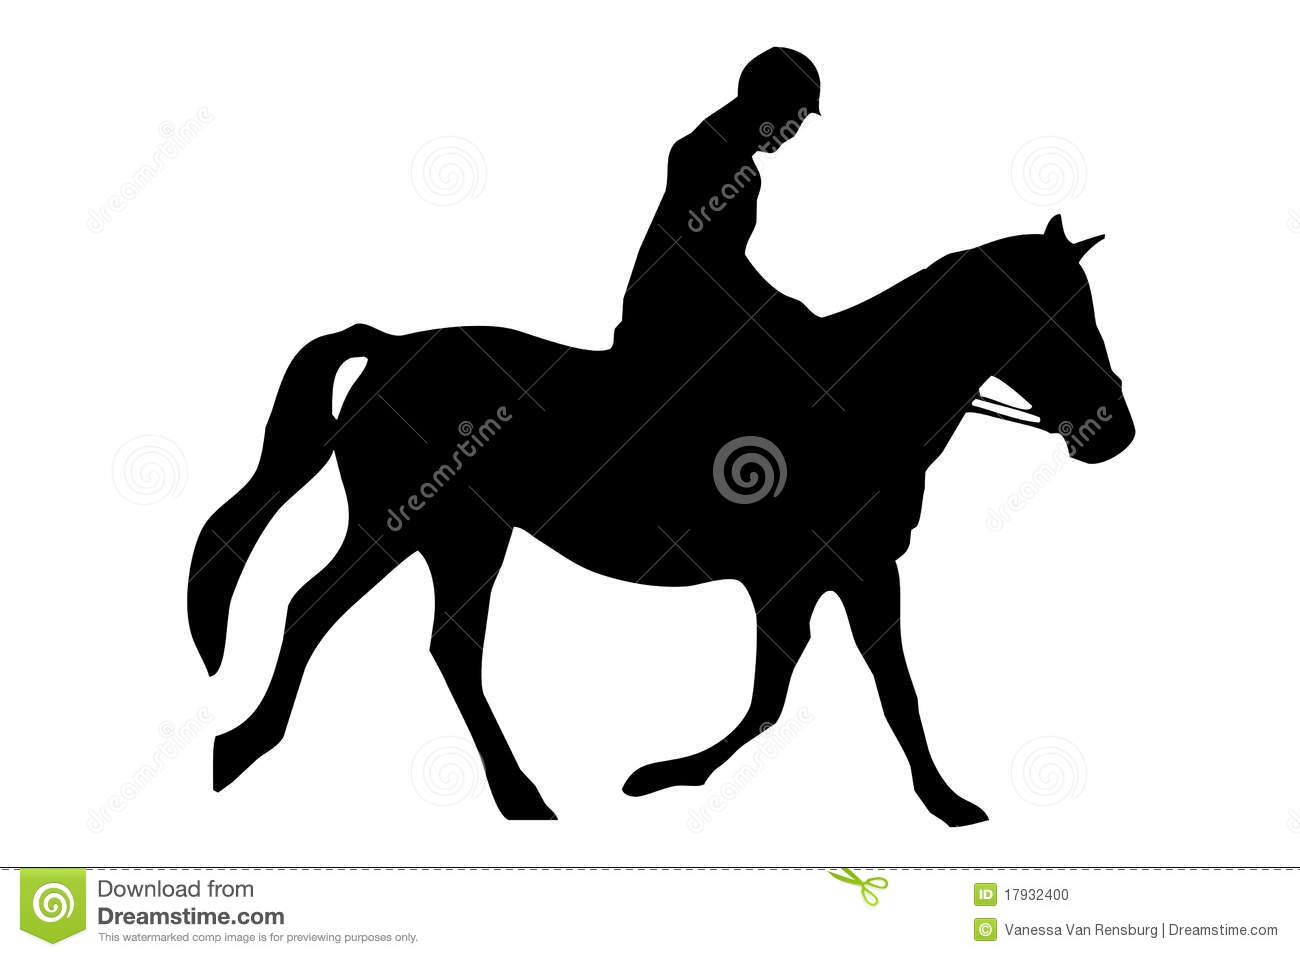 Isolated Silhouette Of Rider On Horse Back Mr No Pr No 2 1199 3